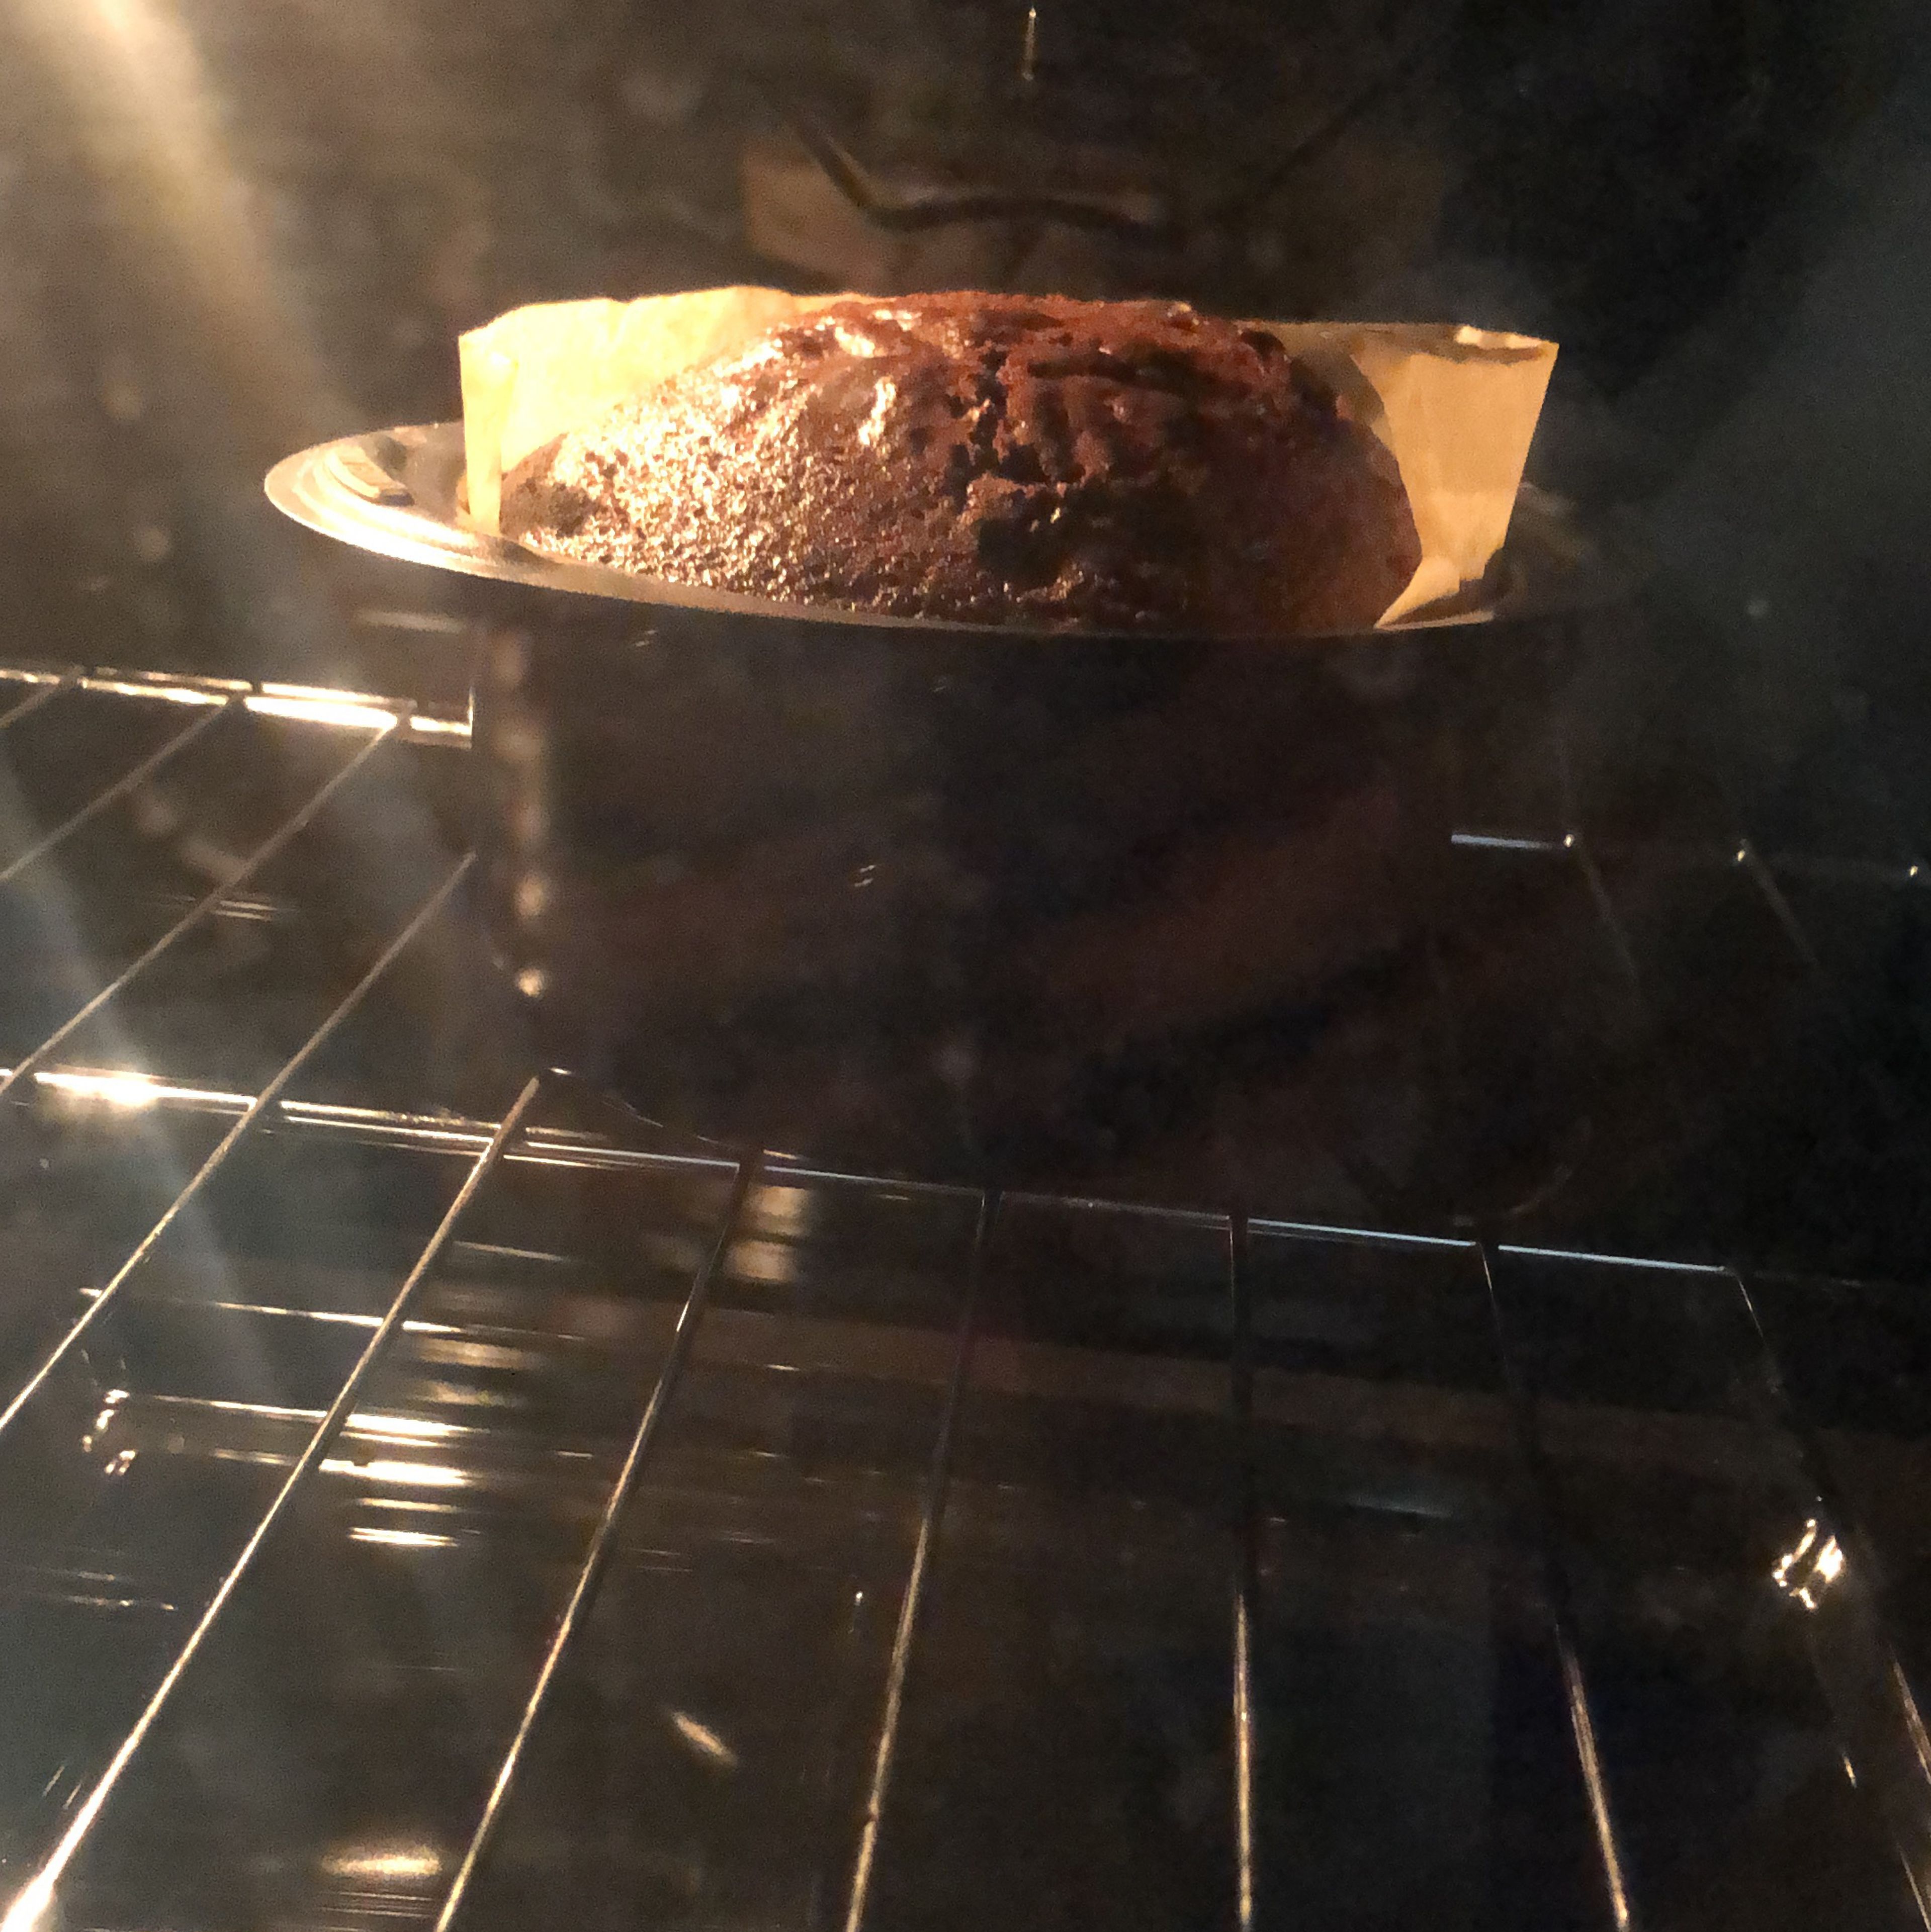 After 30 mins, take a toothpick or a knife and poke inside the cake to see if any cake batter is sticking to it. If cake batter sticks then let the cake bake for another 10 mins, if not switch off the oven and let the cake sit inside the oven for 5 mins to form a lovely glossy crust.